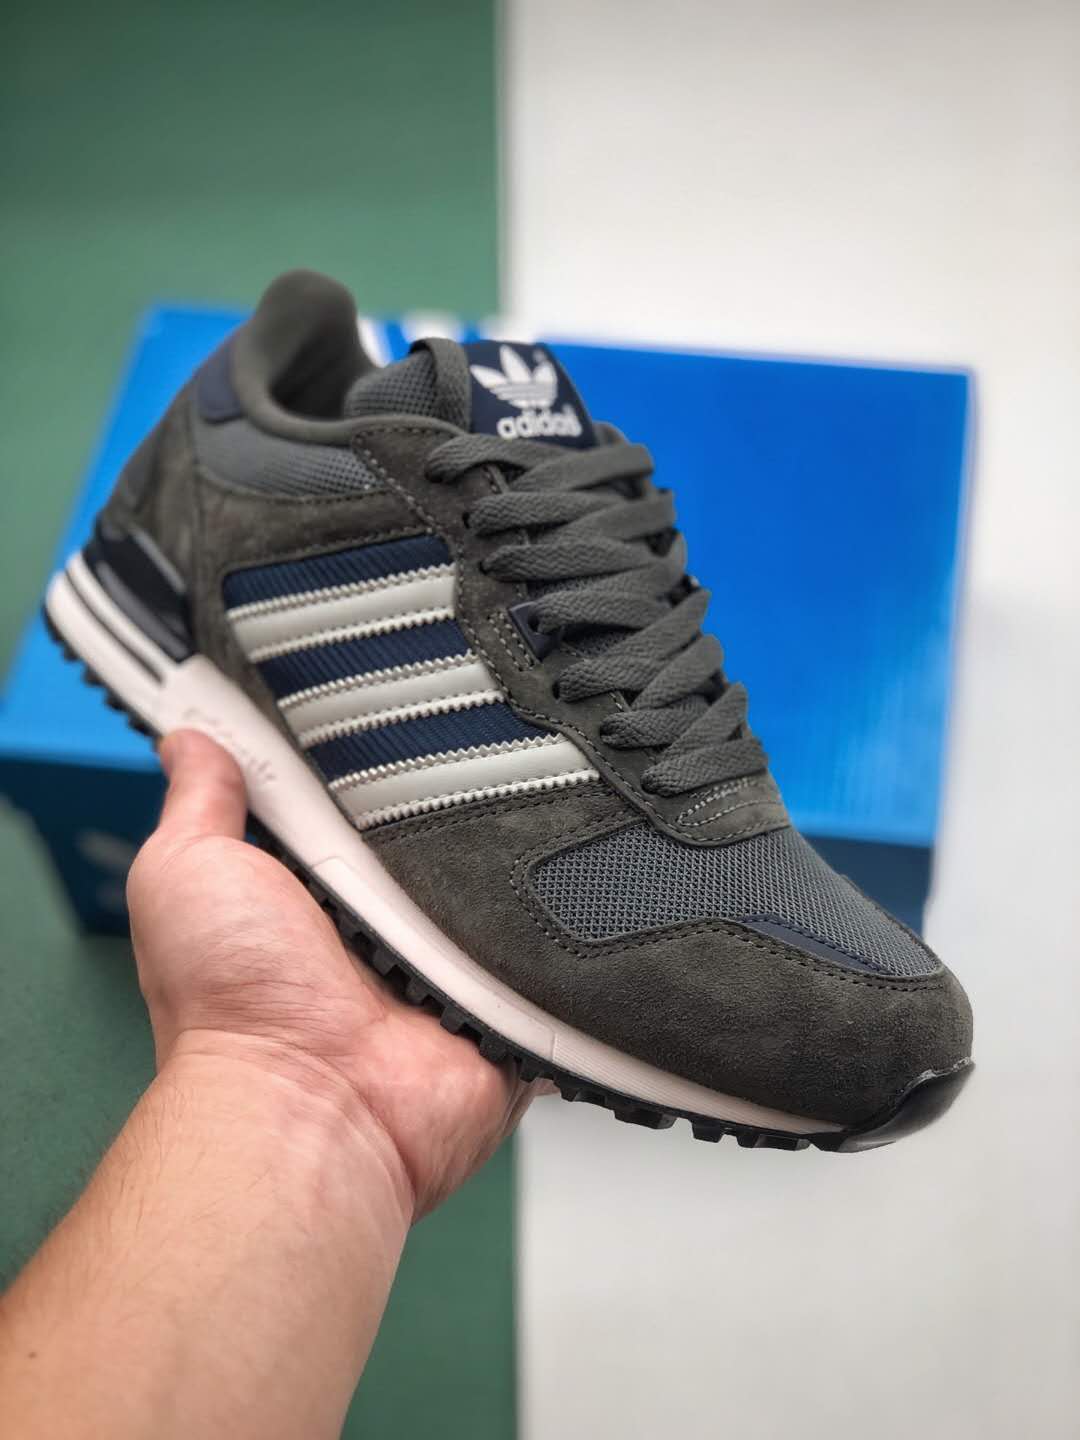 Adidas ZX 700 M19391 - Stylish and Comfortable Sneakers for Men